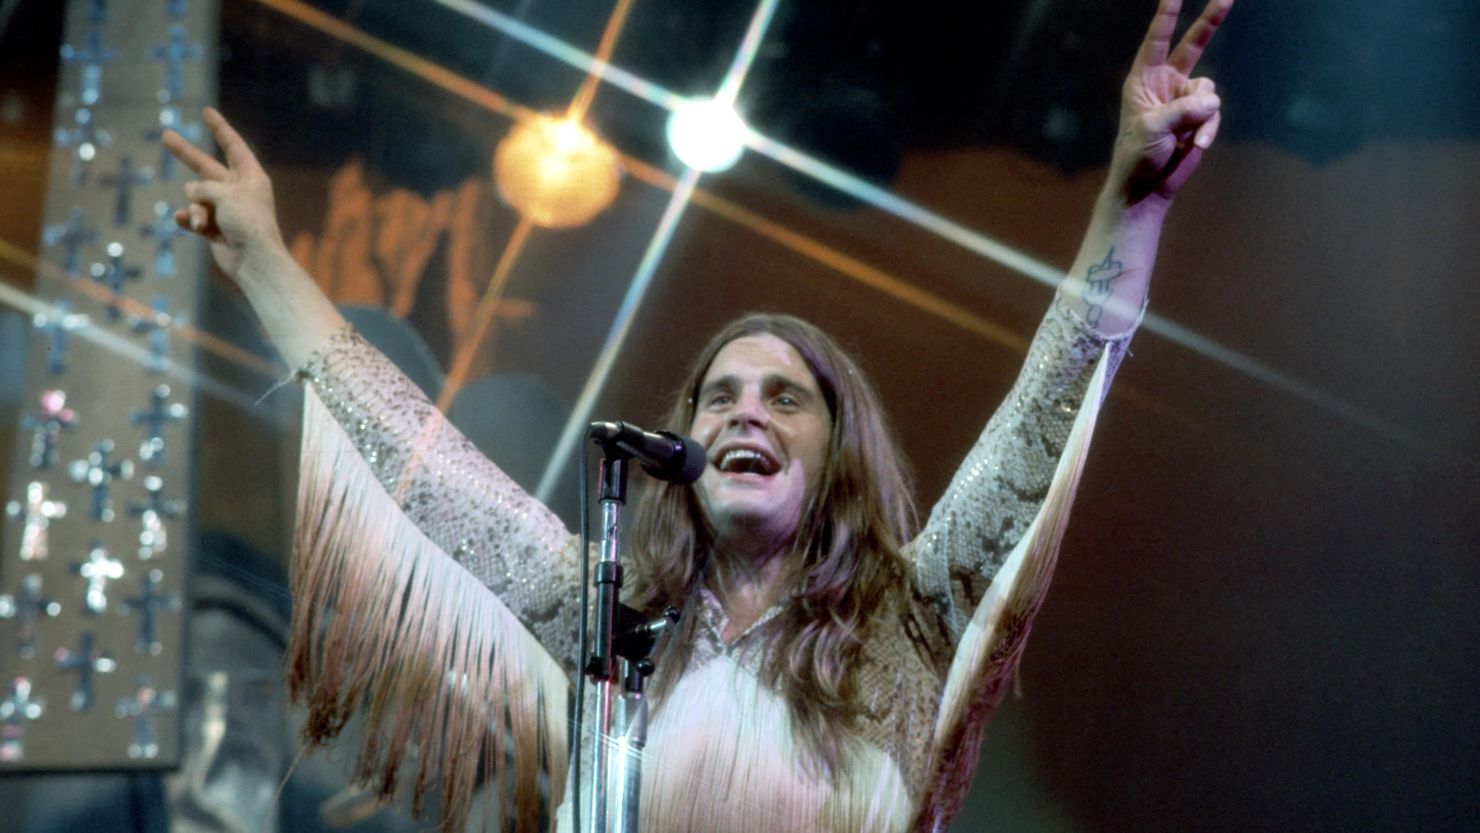 Ozzy Osbourne performing with Black Sabbath in 1970.